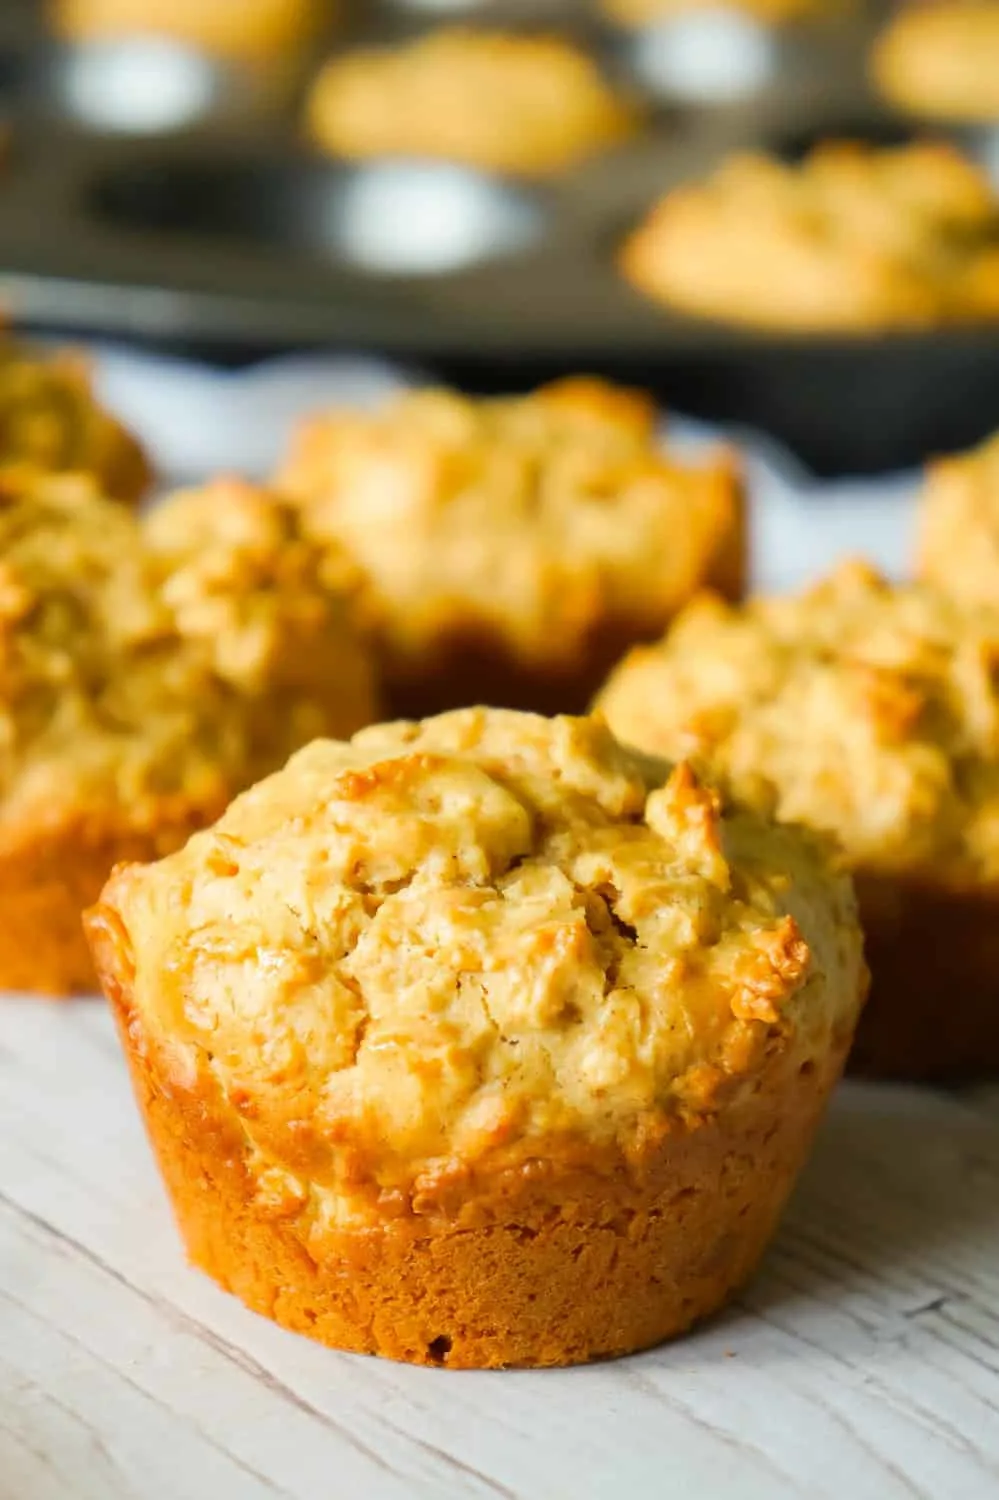 Pumpkin Spice Peanut Butter Oatmeal Muffins are a delicious fall treat loaded with pumpkin pie spice, smooth peanut butter and Reese's peanut butter baking chips.